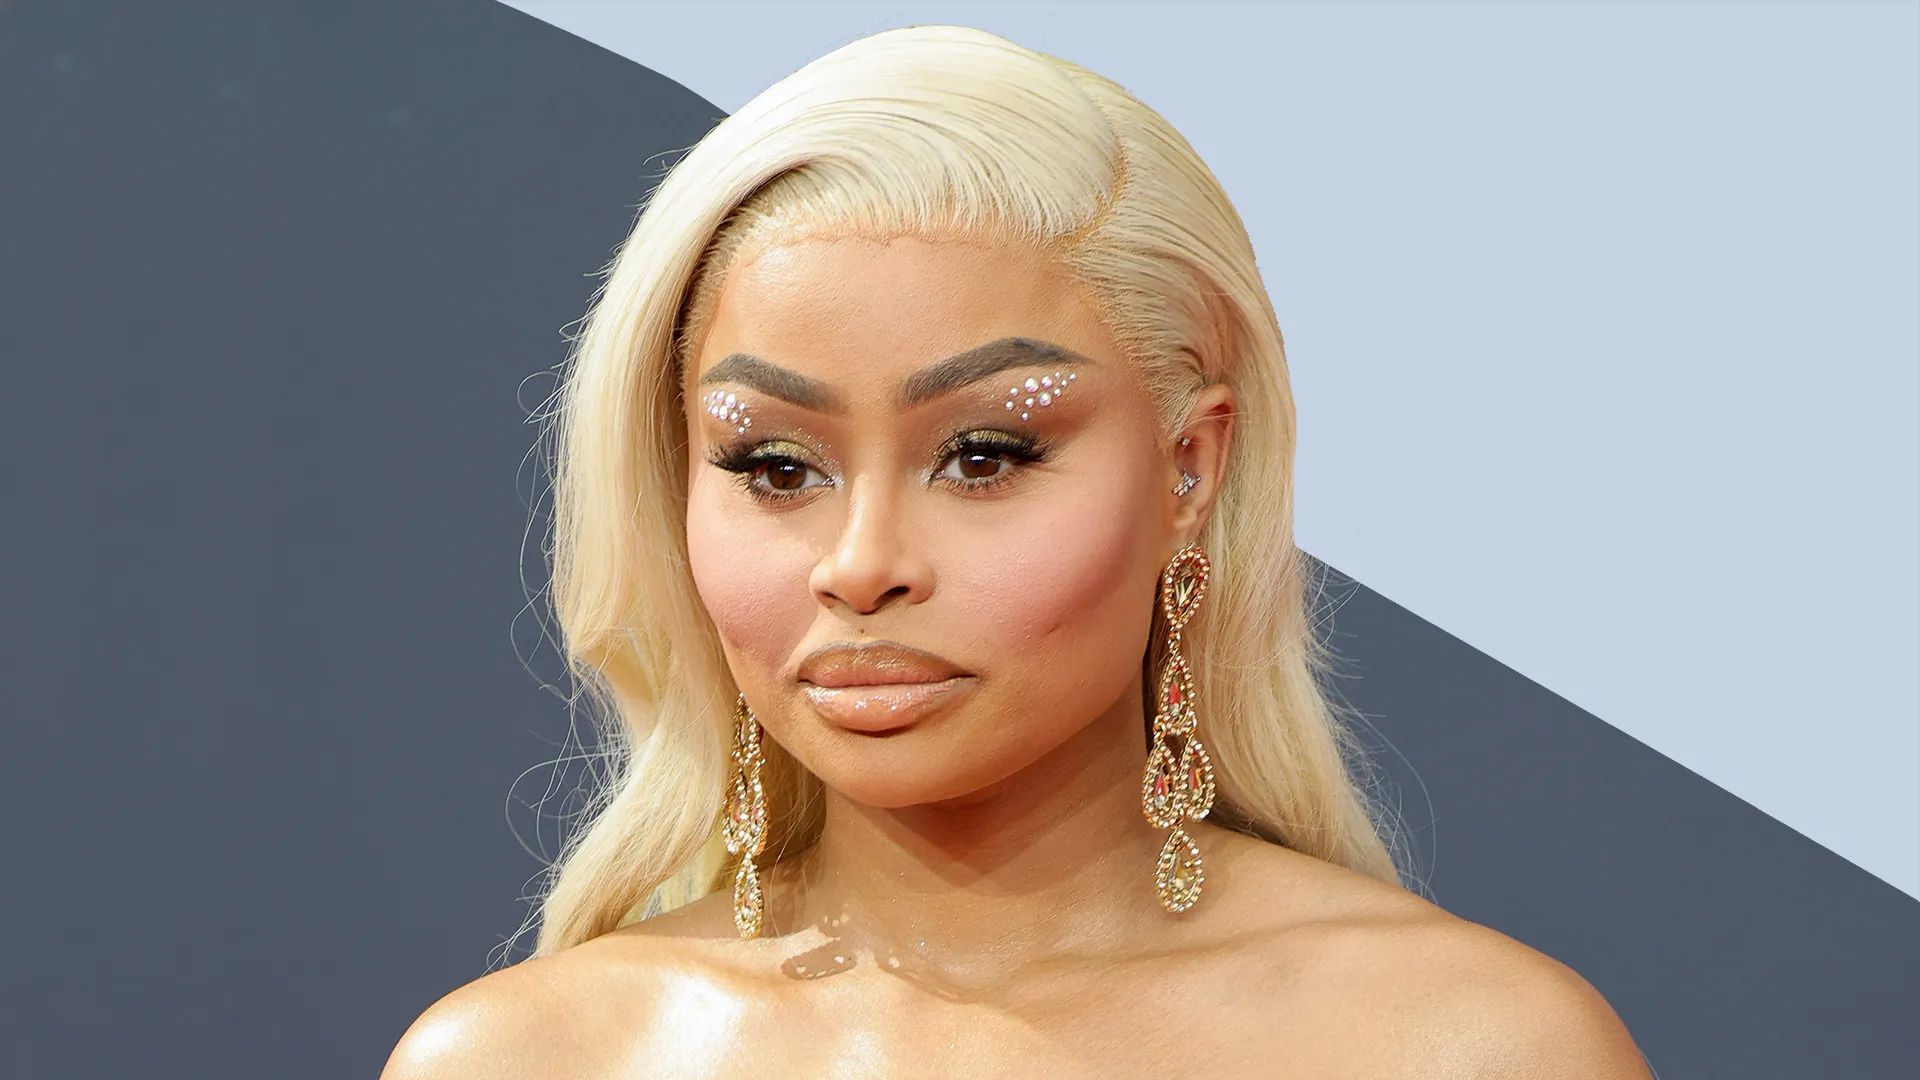 blac-chyna-reveals-financial-struggles-and-seeks-support-from-tyga-for-custody-battle